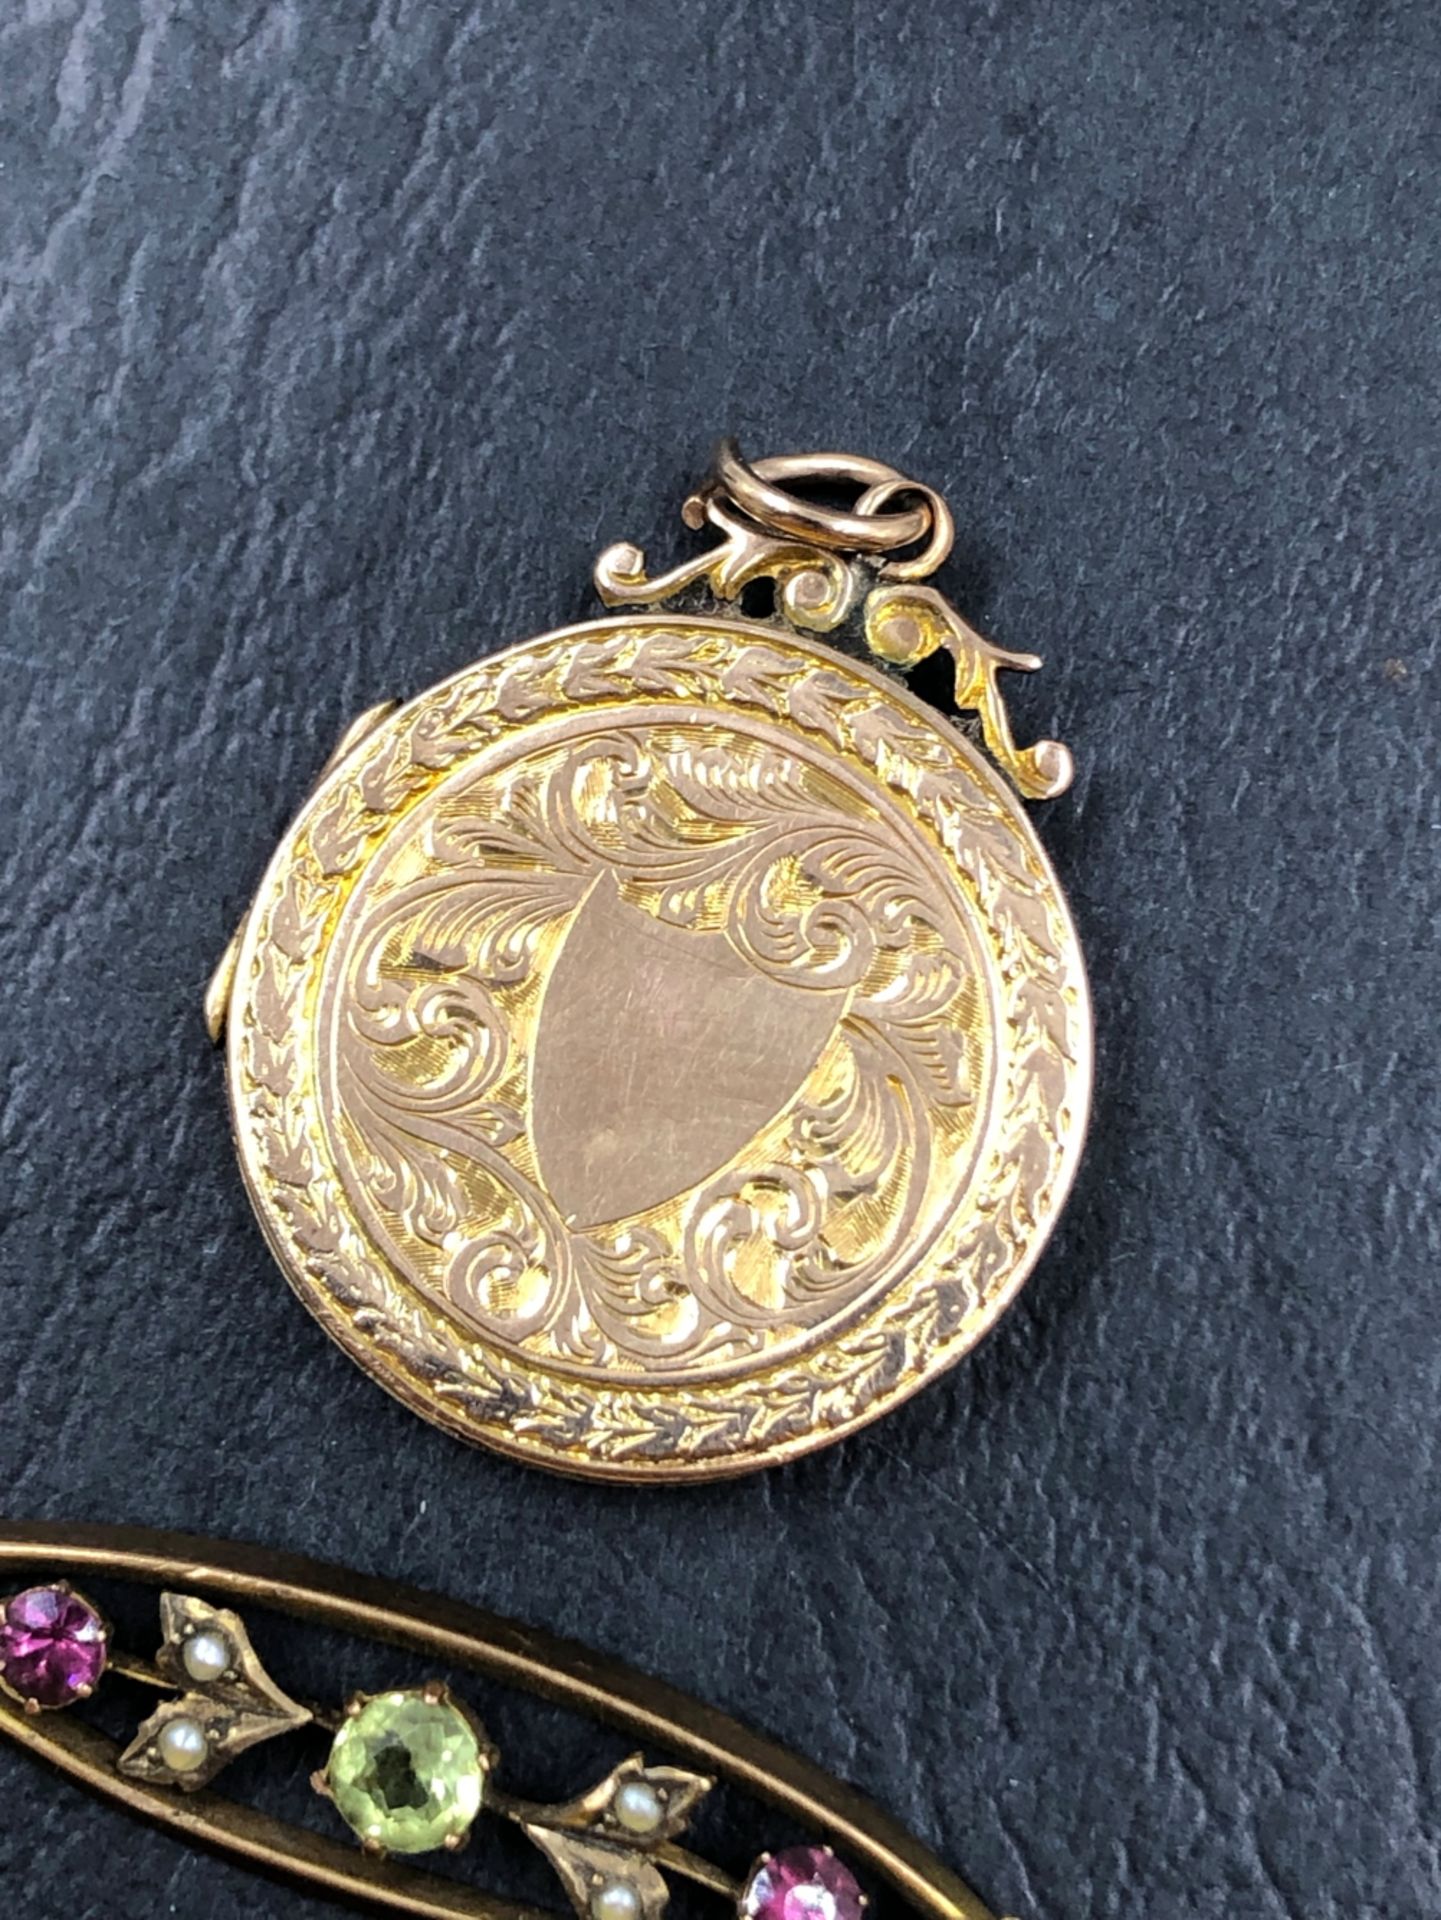 A 9ct GOLD HALLMARKED EDWARDIAN BAR BROOCH, OF SUFFRAGETTE INFLUENCE, FOR C M WRIGHTON, CHESTER - Image 3 of 3